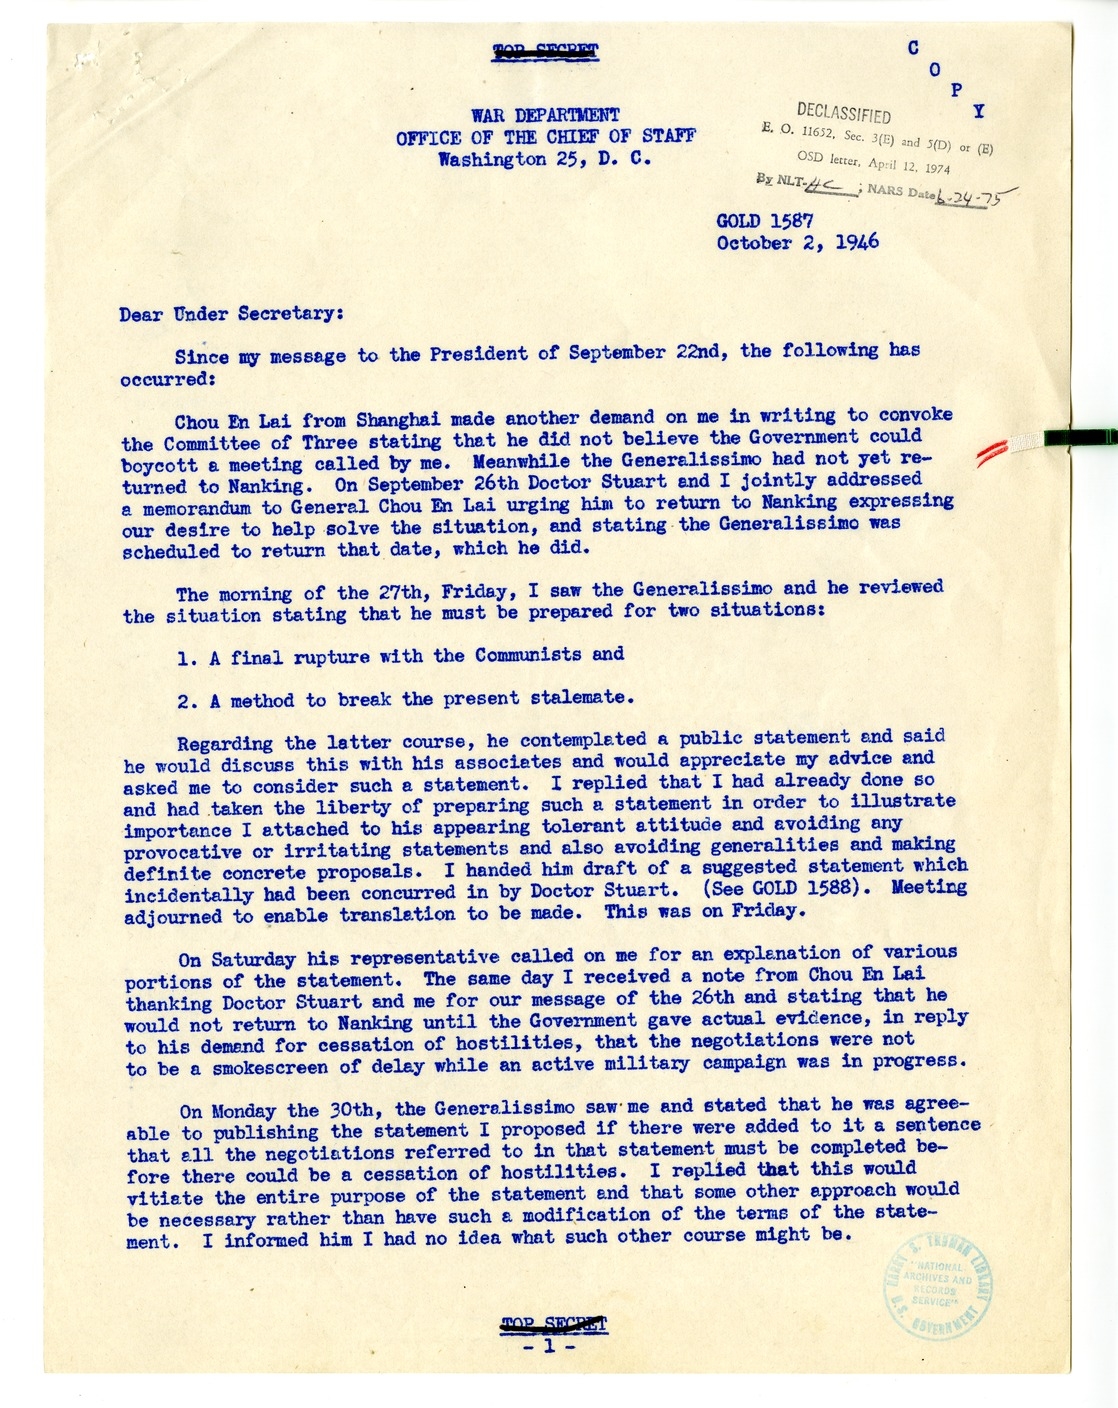 Memorandum from President Harry S. Truman to the Acting Secretary of State, with Attachments